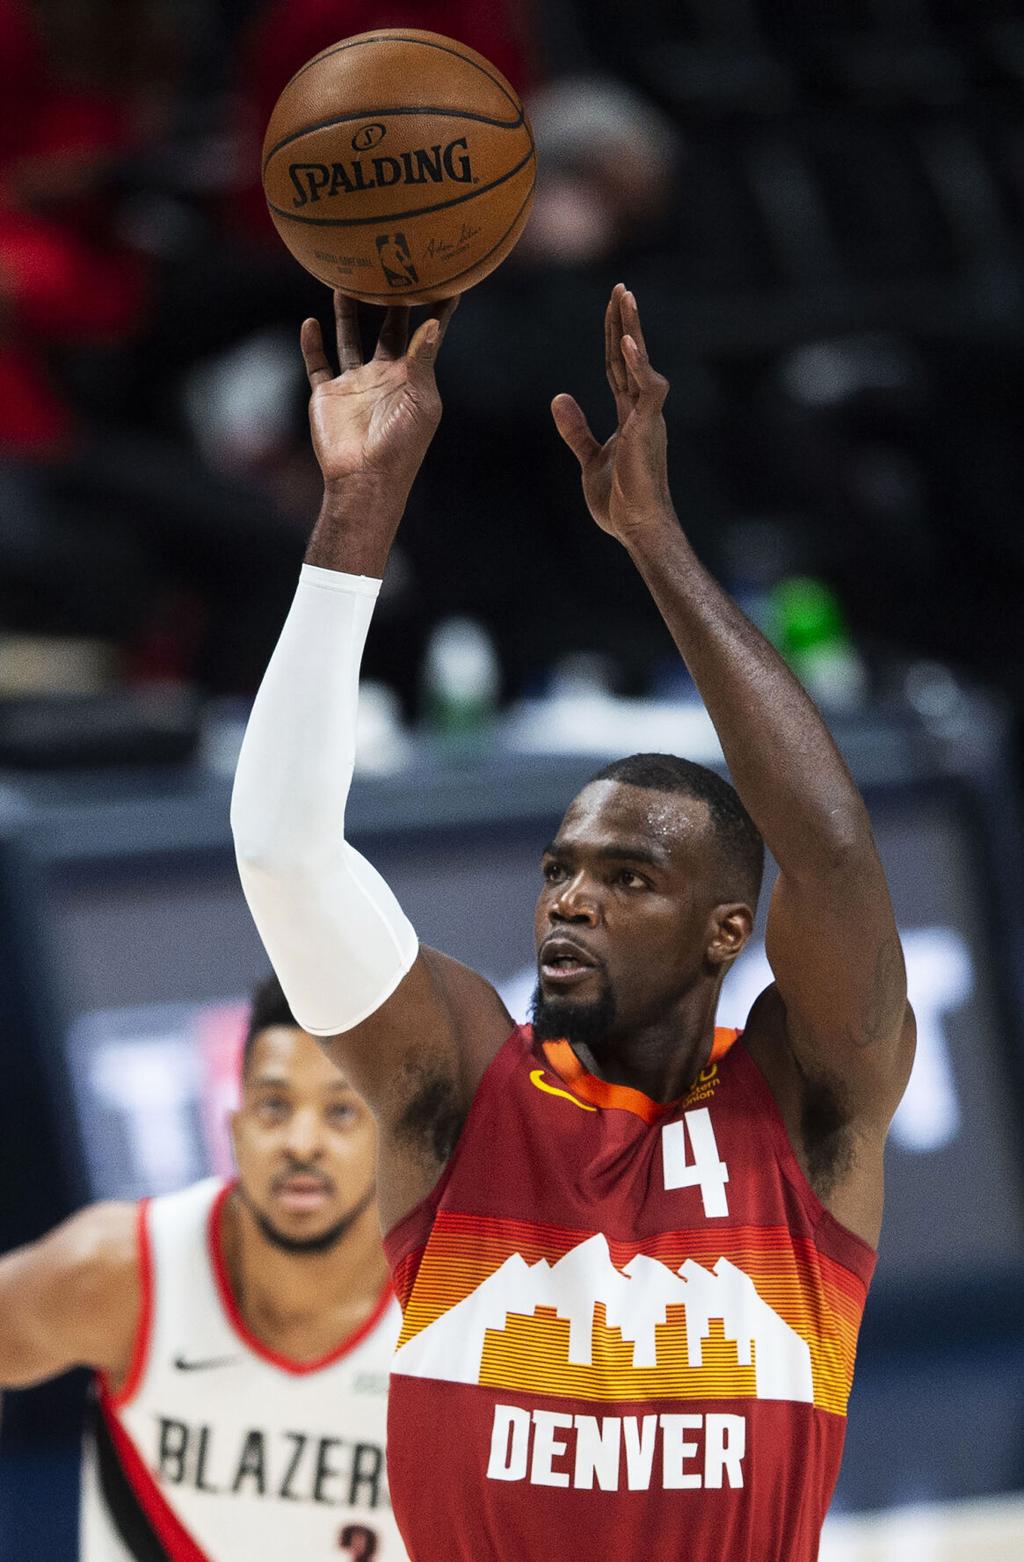 Nuggets' Paul Millsap: 'We'll get this one Saturday